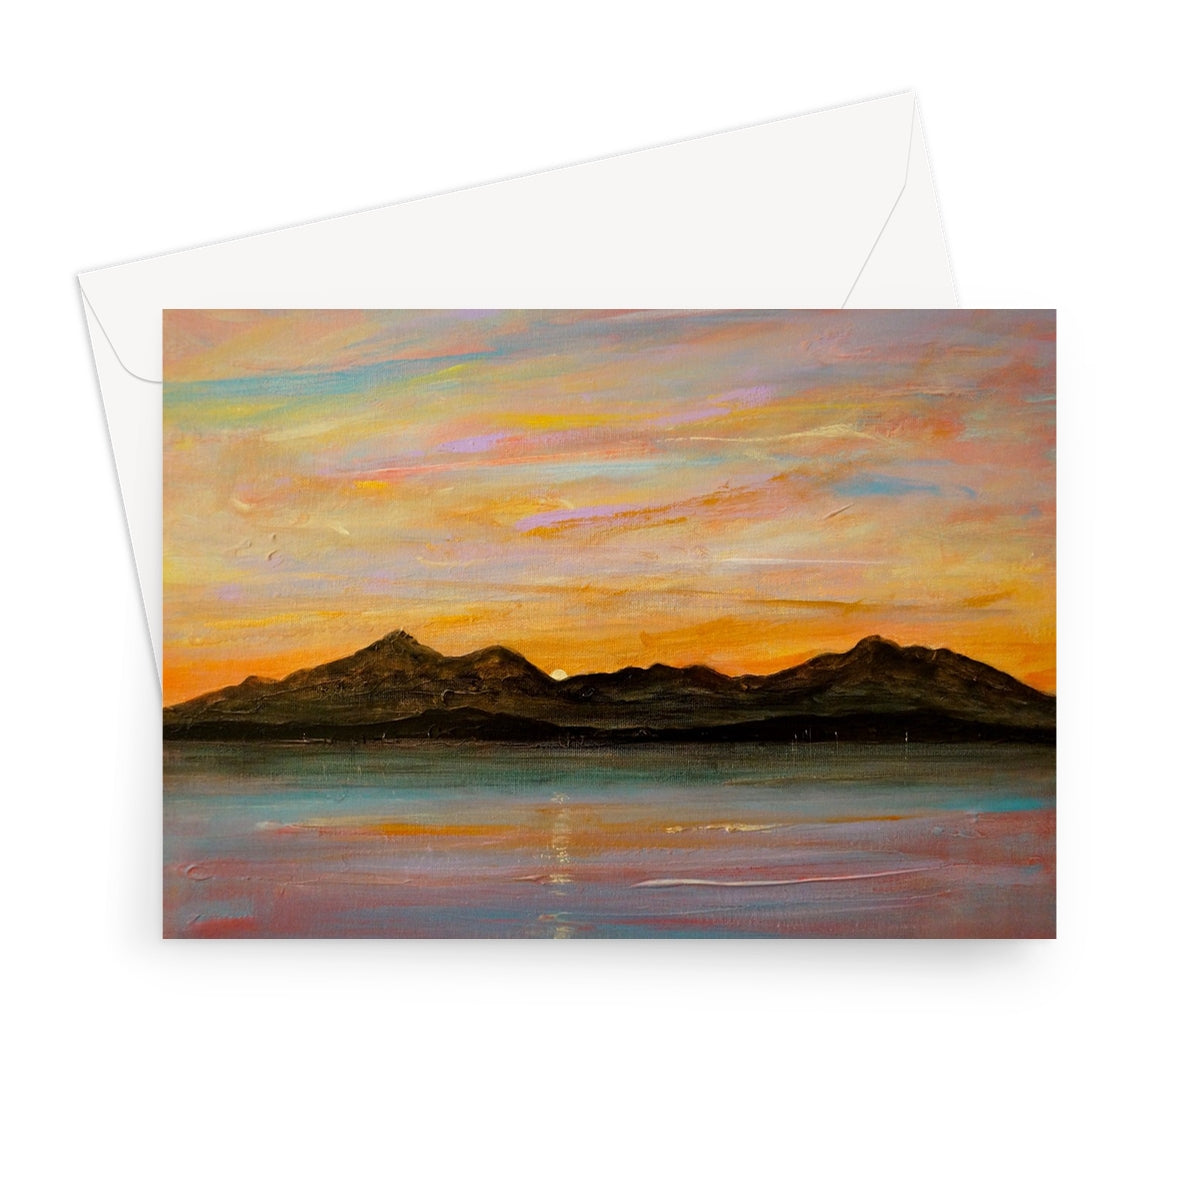 The Sleeping Warrior Arran Art Gifts Greeting Card-Greetings Cards-Arran Art Gallery-7"x5"-1 Card-Paintings, Prints, Homeware, Art Gifts From Scotland By Scottish Artist Kevin Hunter